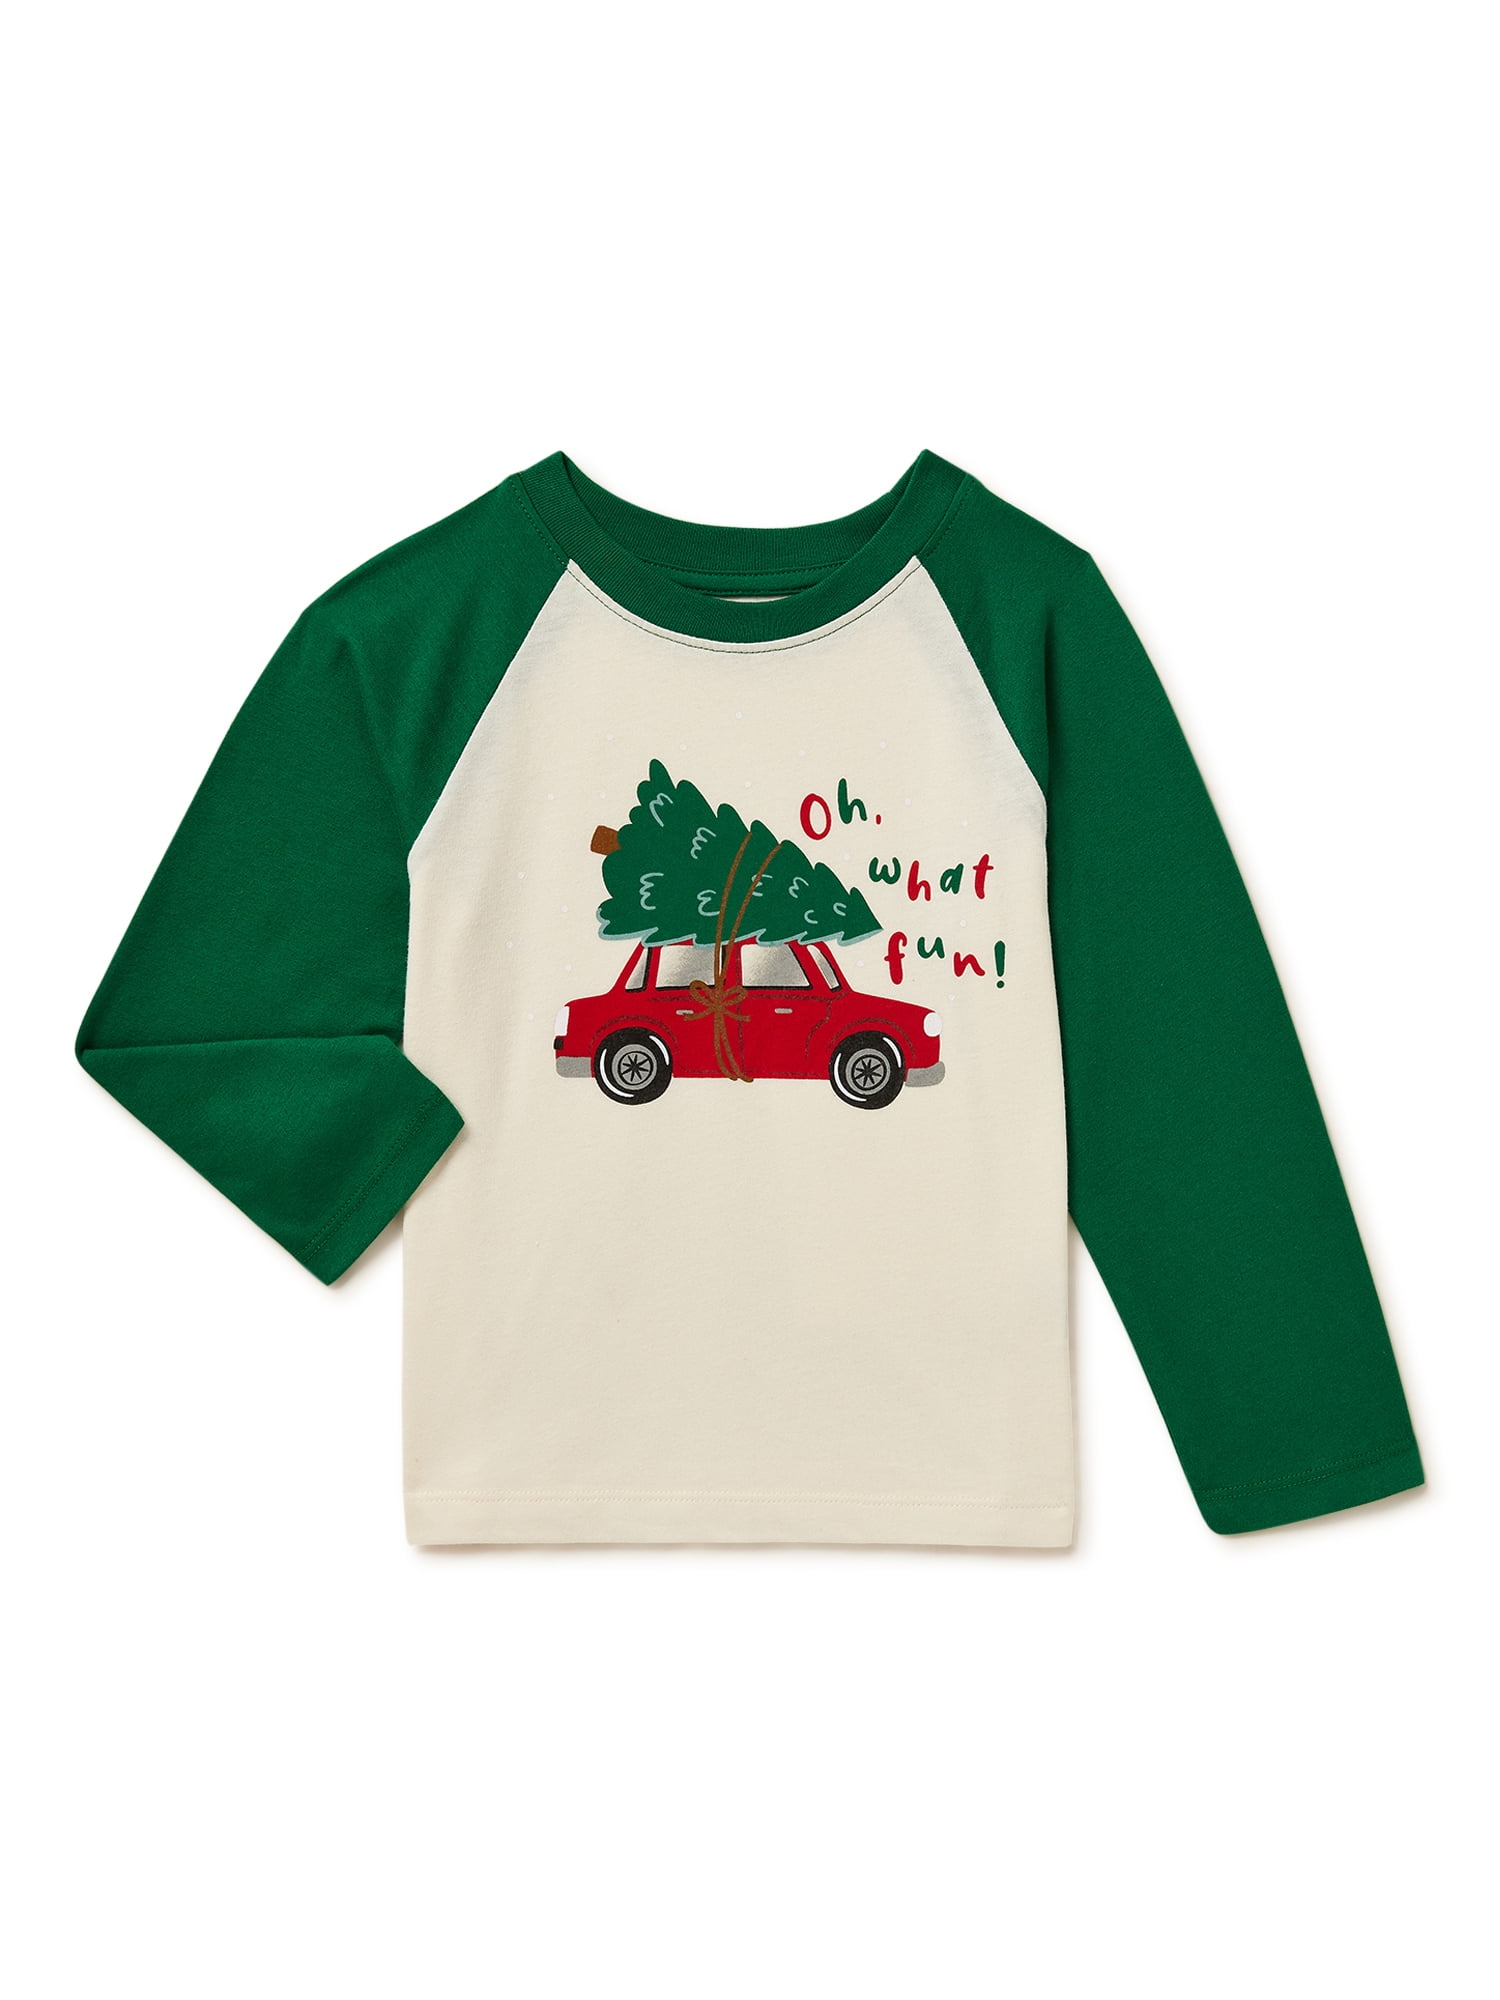 Holiday Time Baby and Toddler Unisex Long Sleeve Raglan Christmas Tee, Sizes Sizes 12 Months-5T